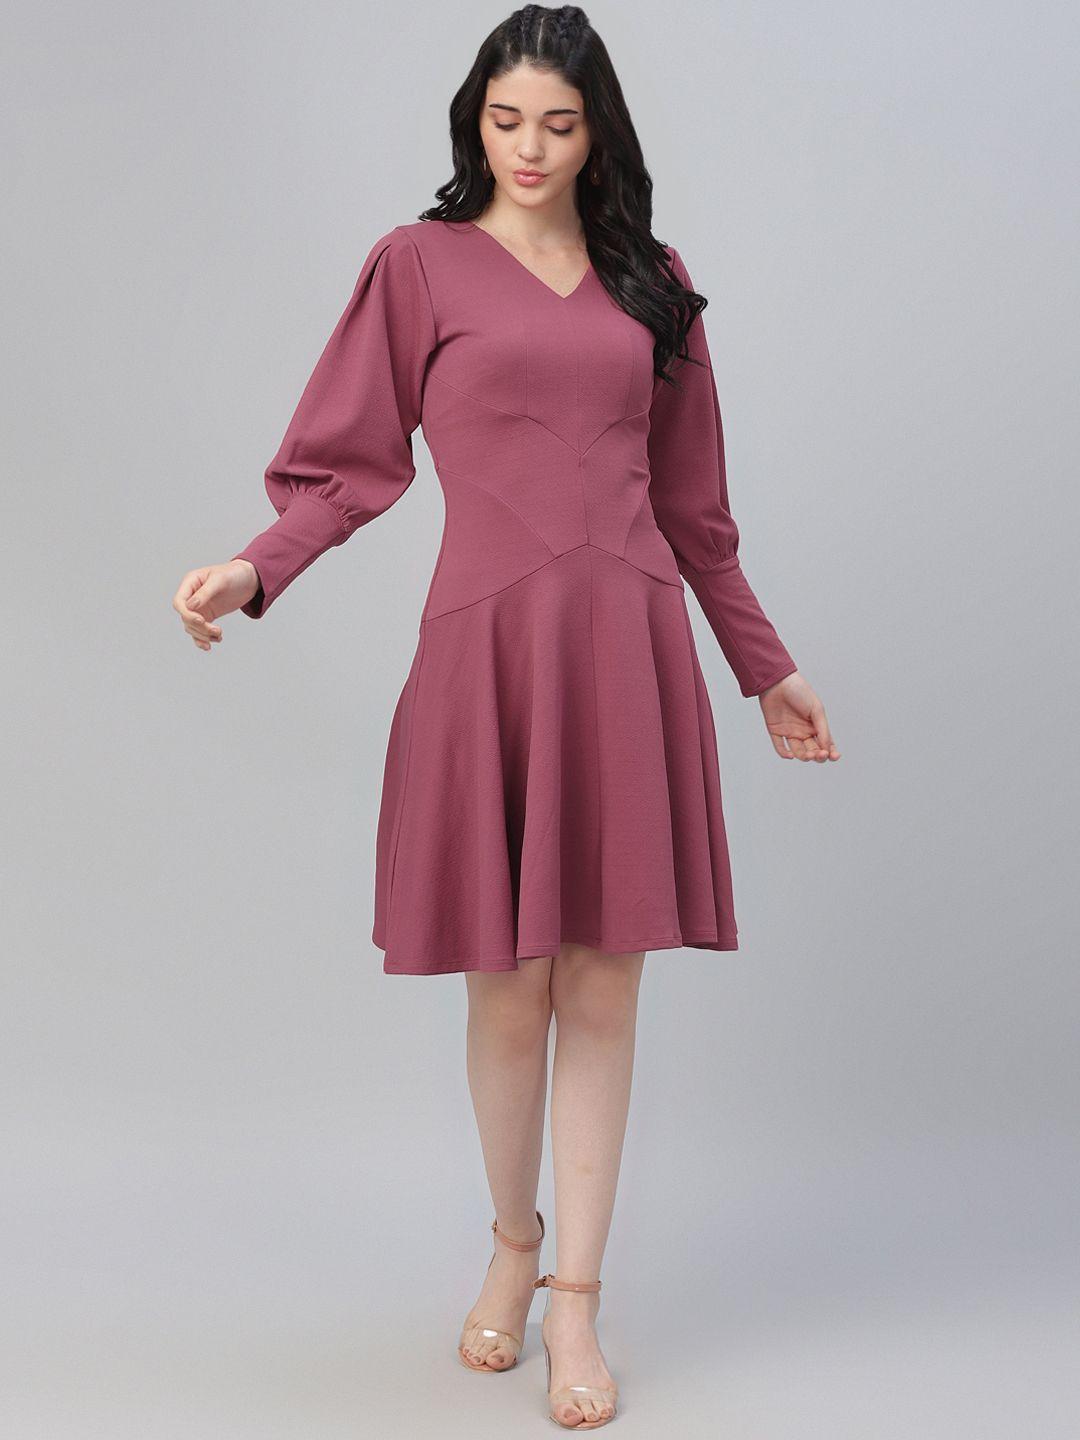 athena women mauve solid fit and flare dress